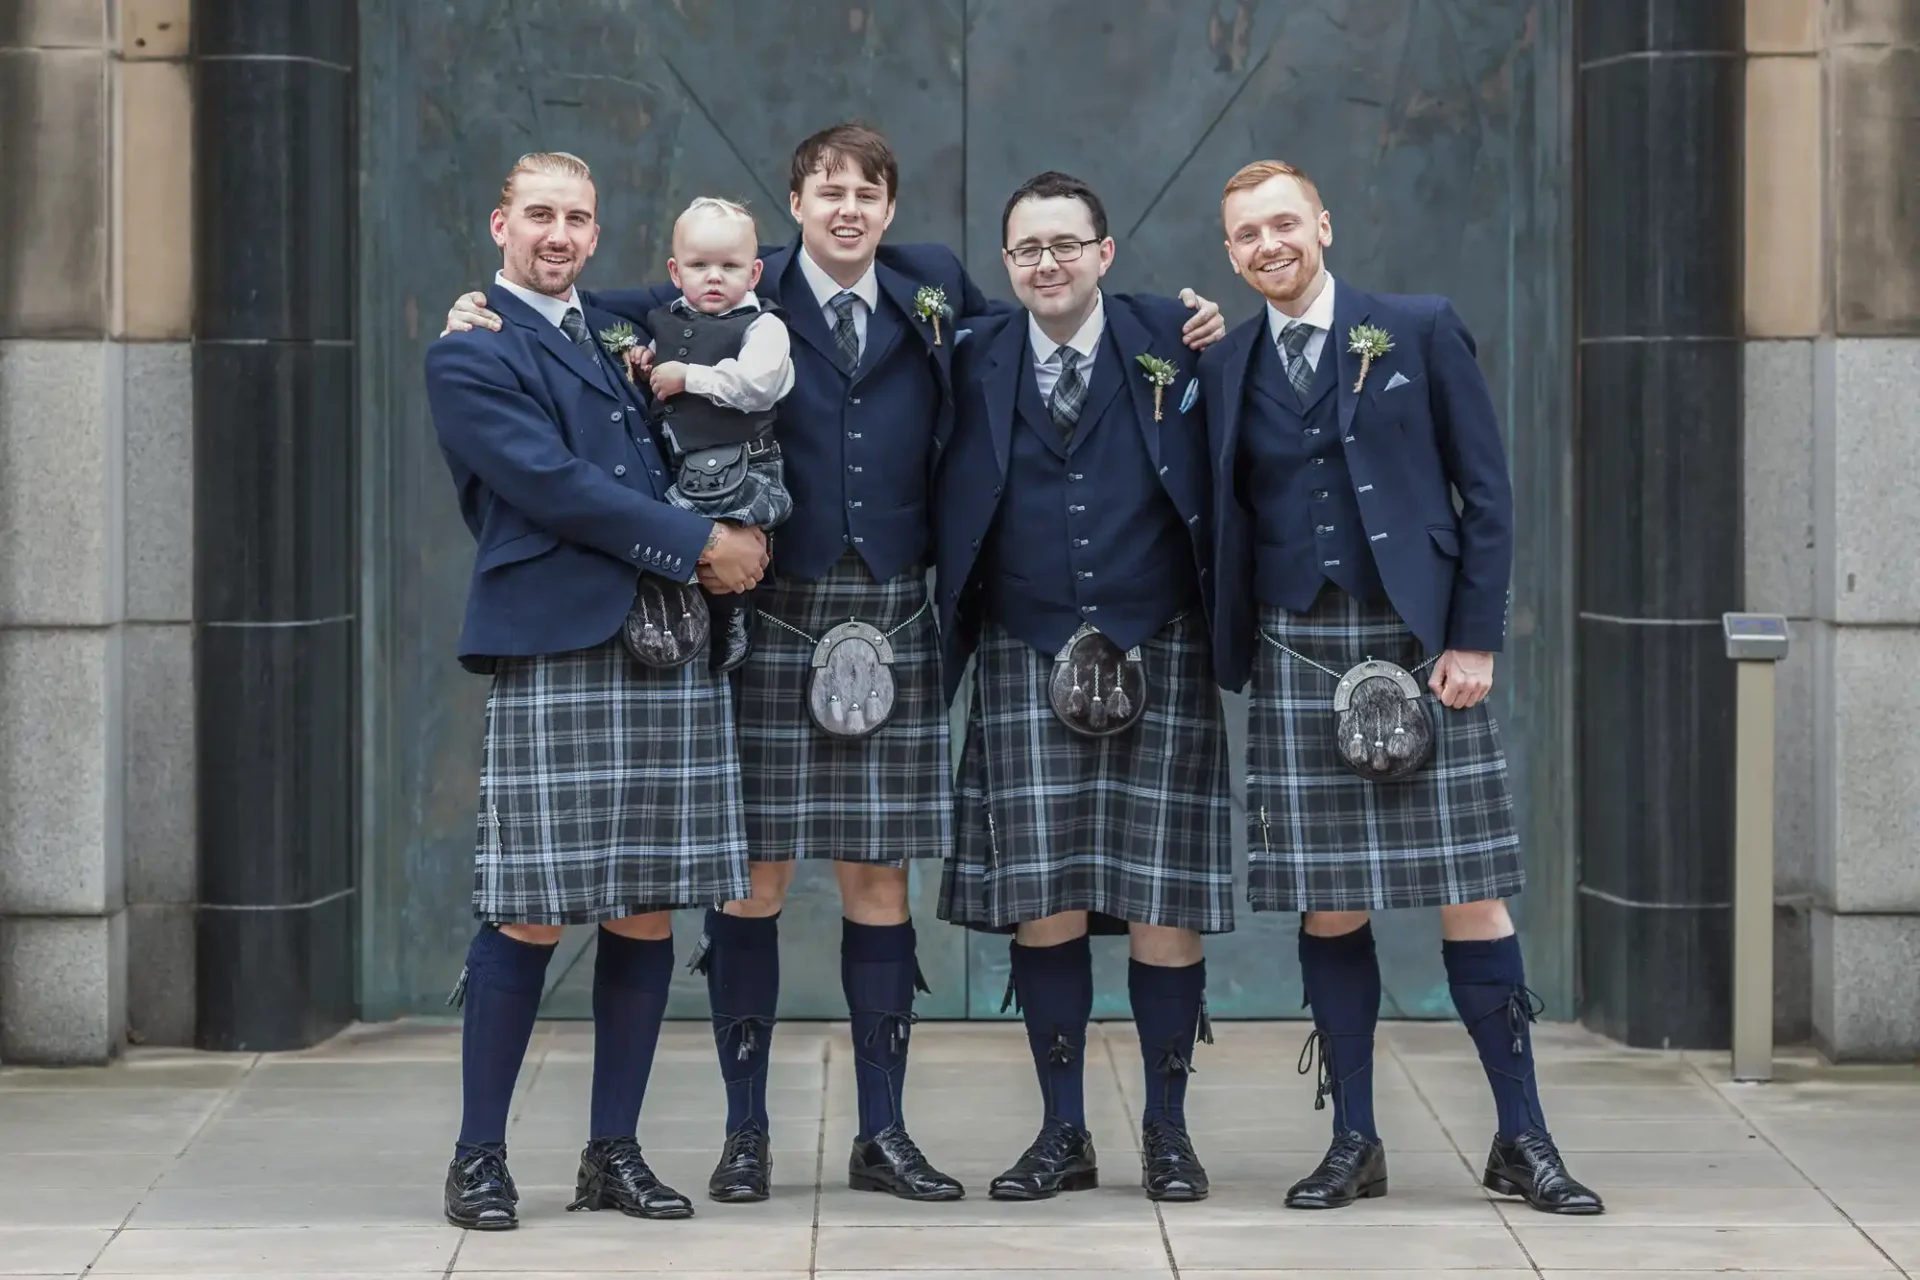 Four men in traditional scottish kilts and jackets, smiling with a baby, standing against a stone columned backdrop.